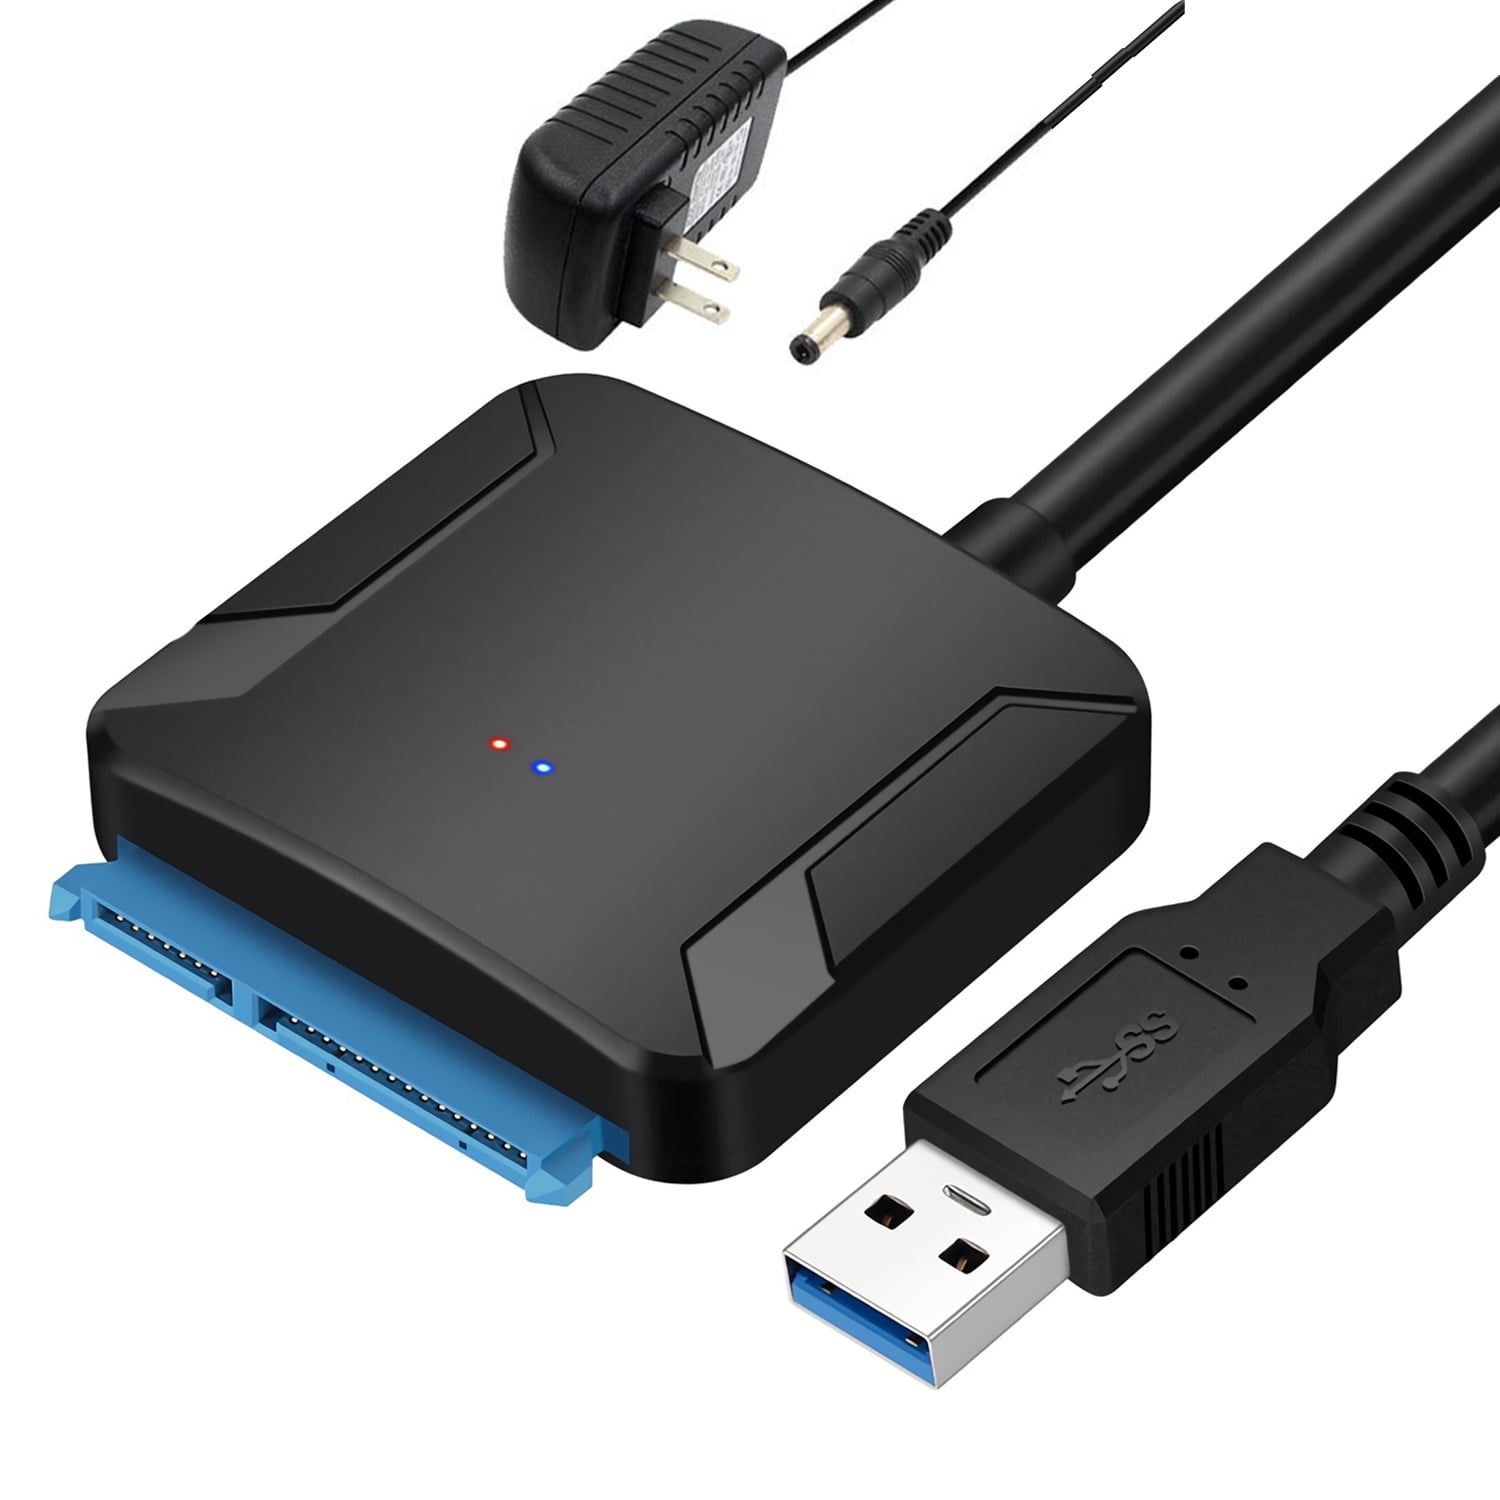 Mening løfte Saucer EYOOLD USB 3.0 to SATA III Hard Drive Adapter Cable for 2.5" 3.5" SSD HDD  with 12V 2A Power Supply - Walmart.com